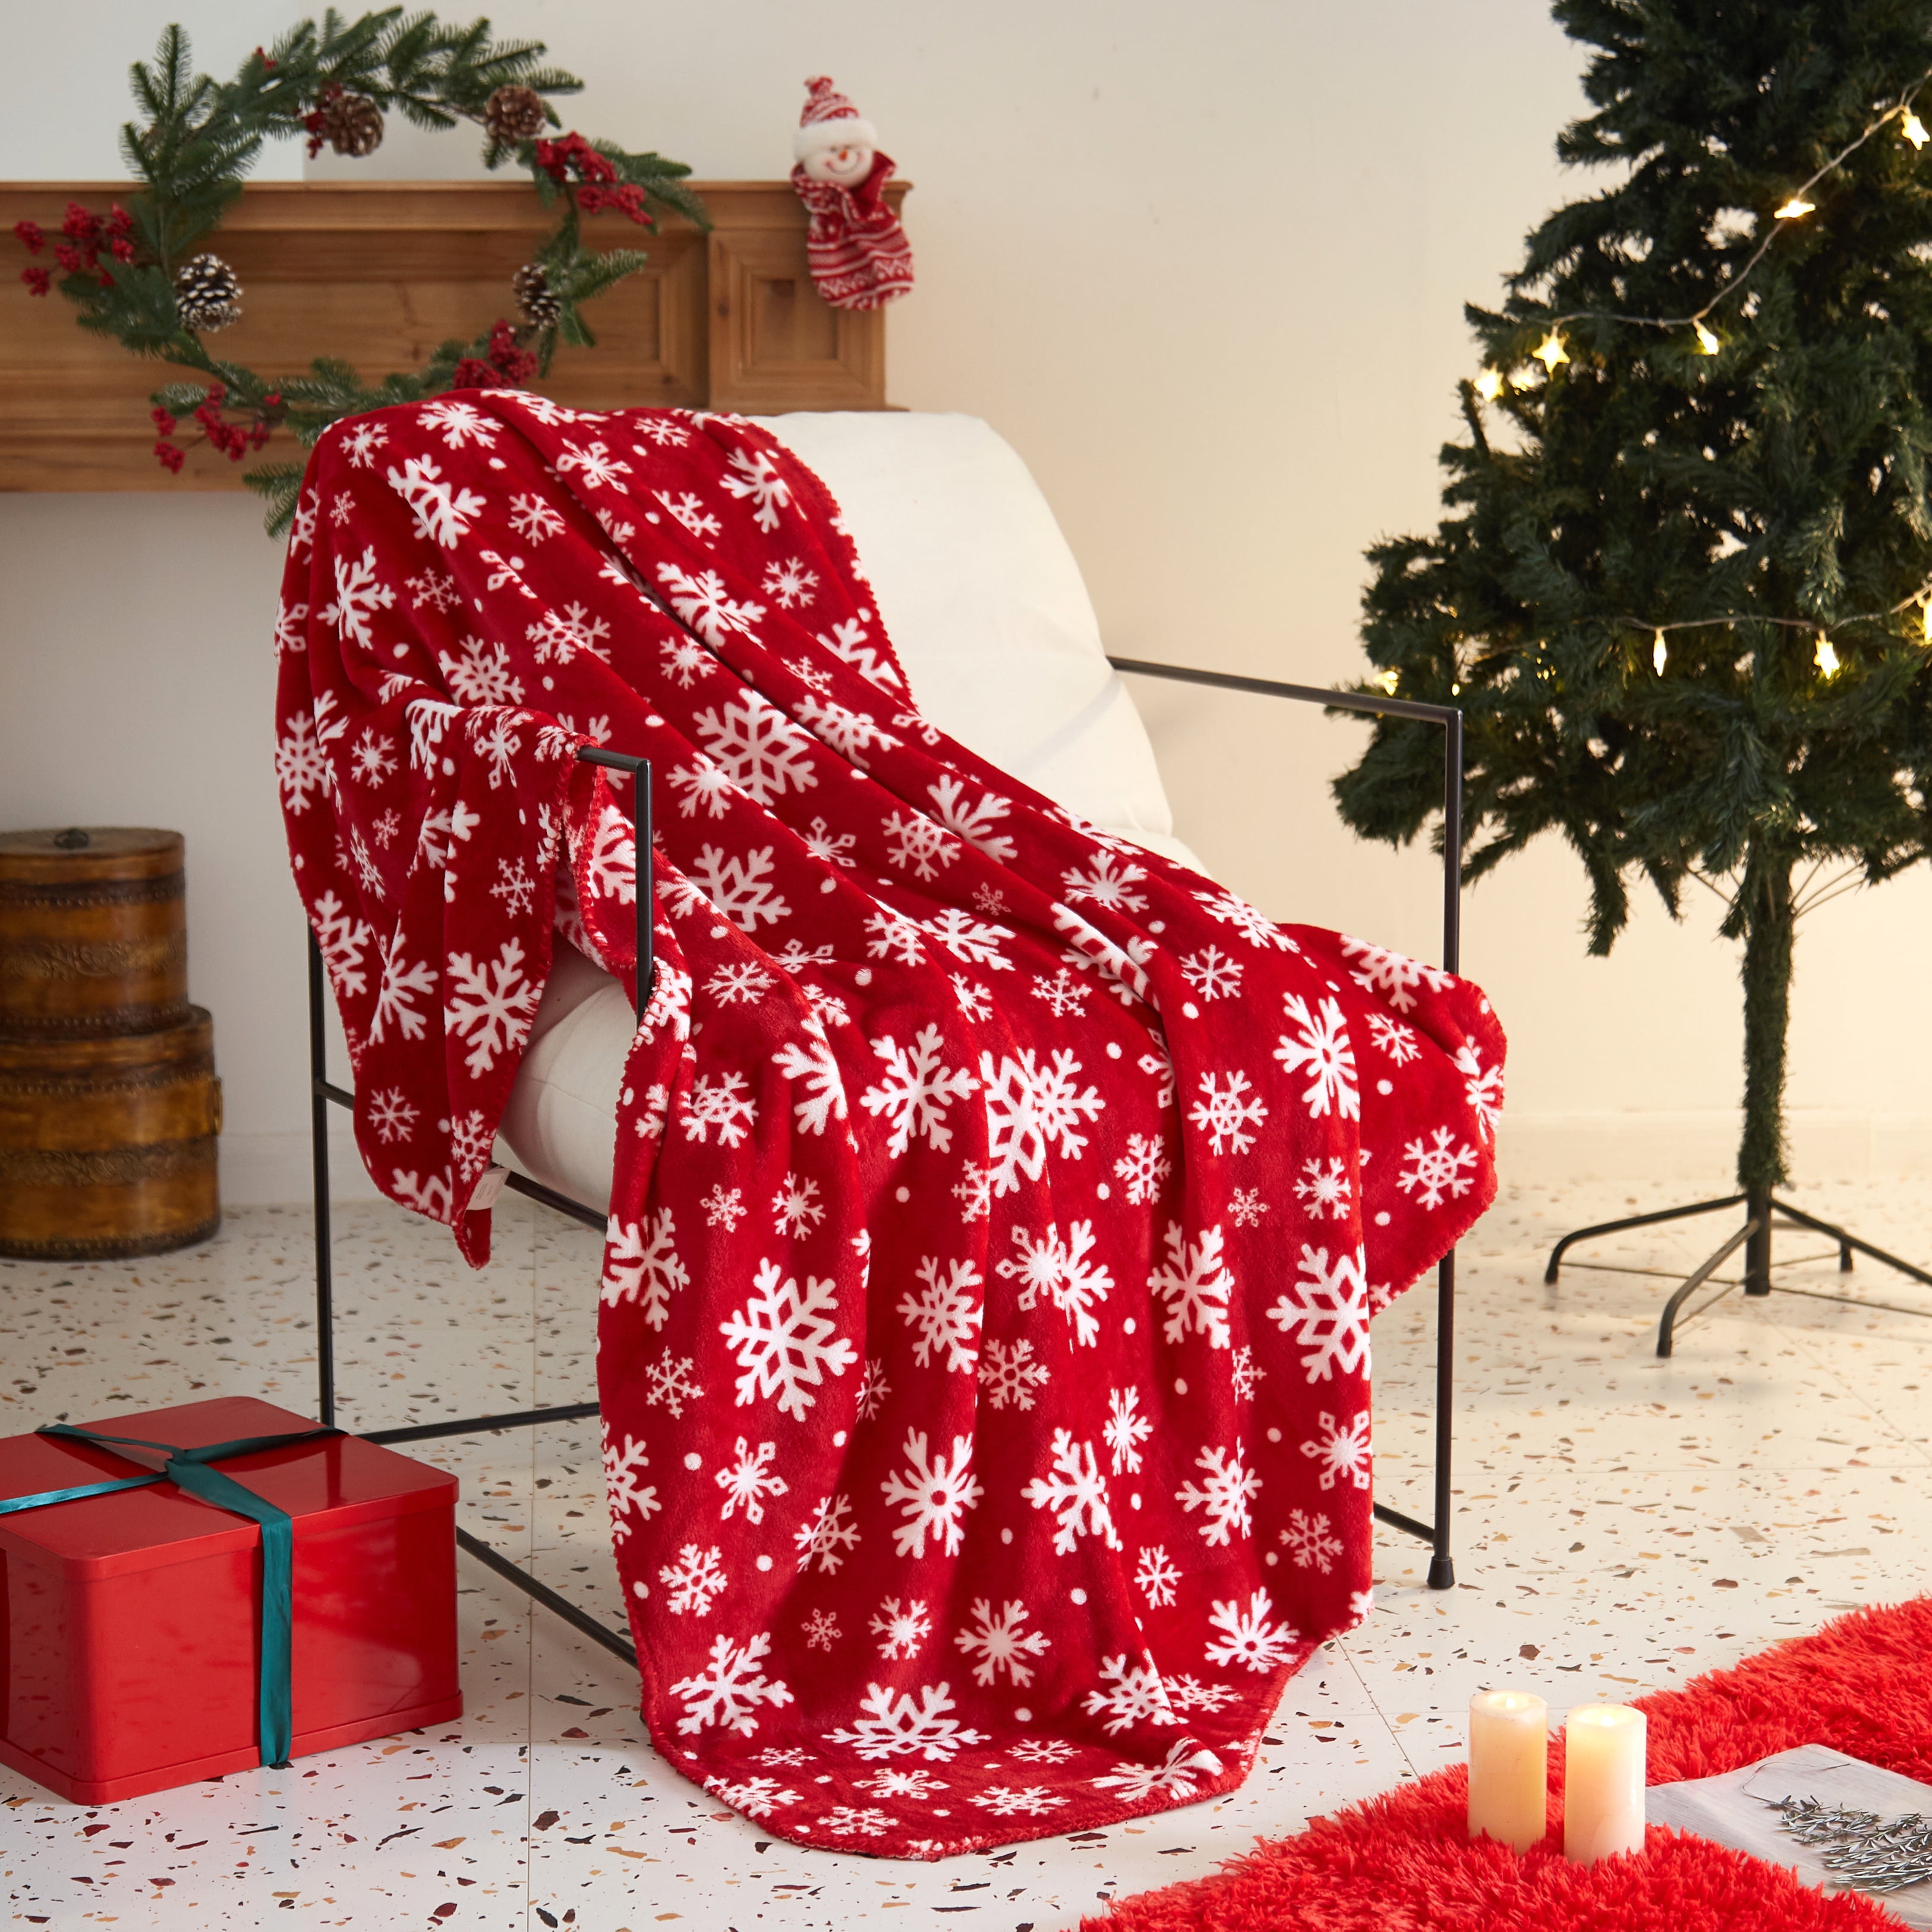 Holiday Time Plush Throw Racer Red 50 x 60 inches Blanket